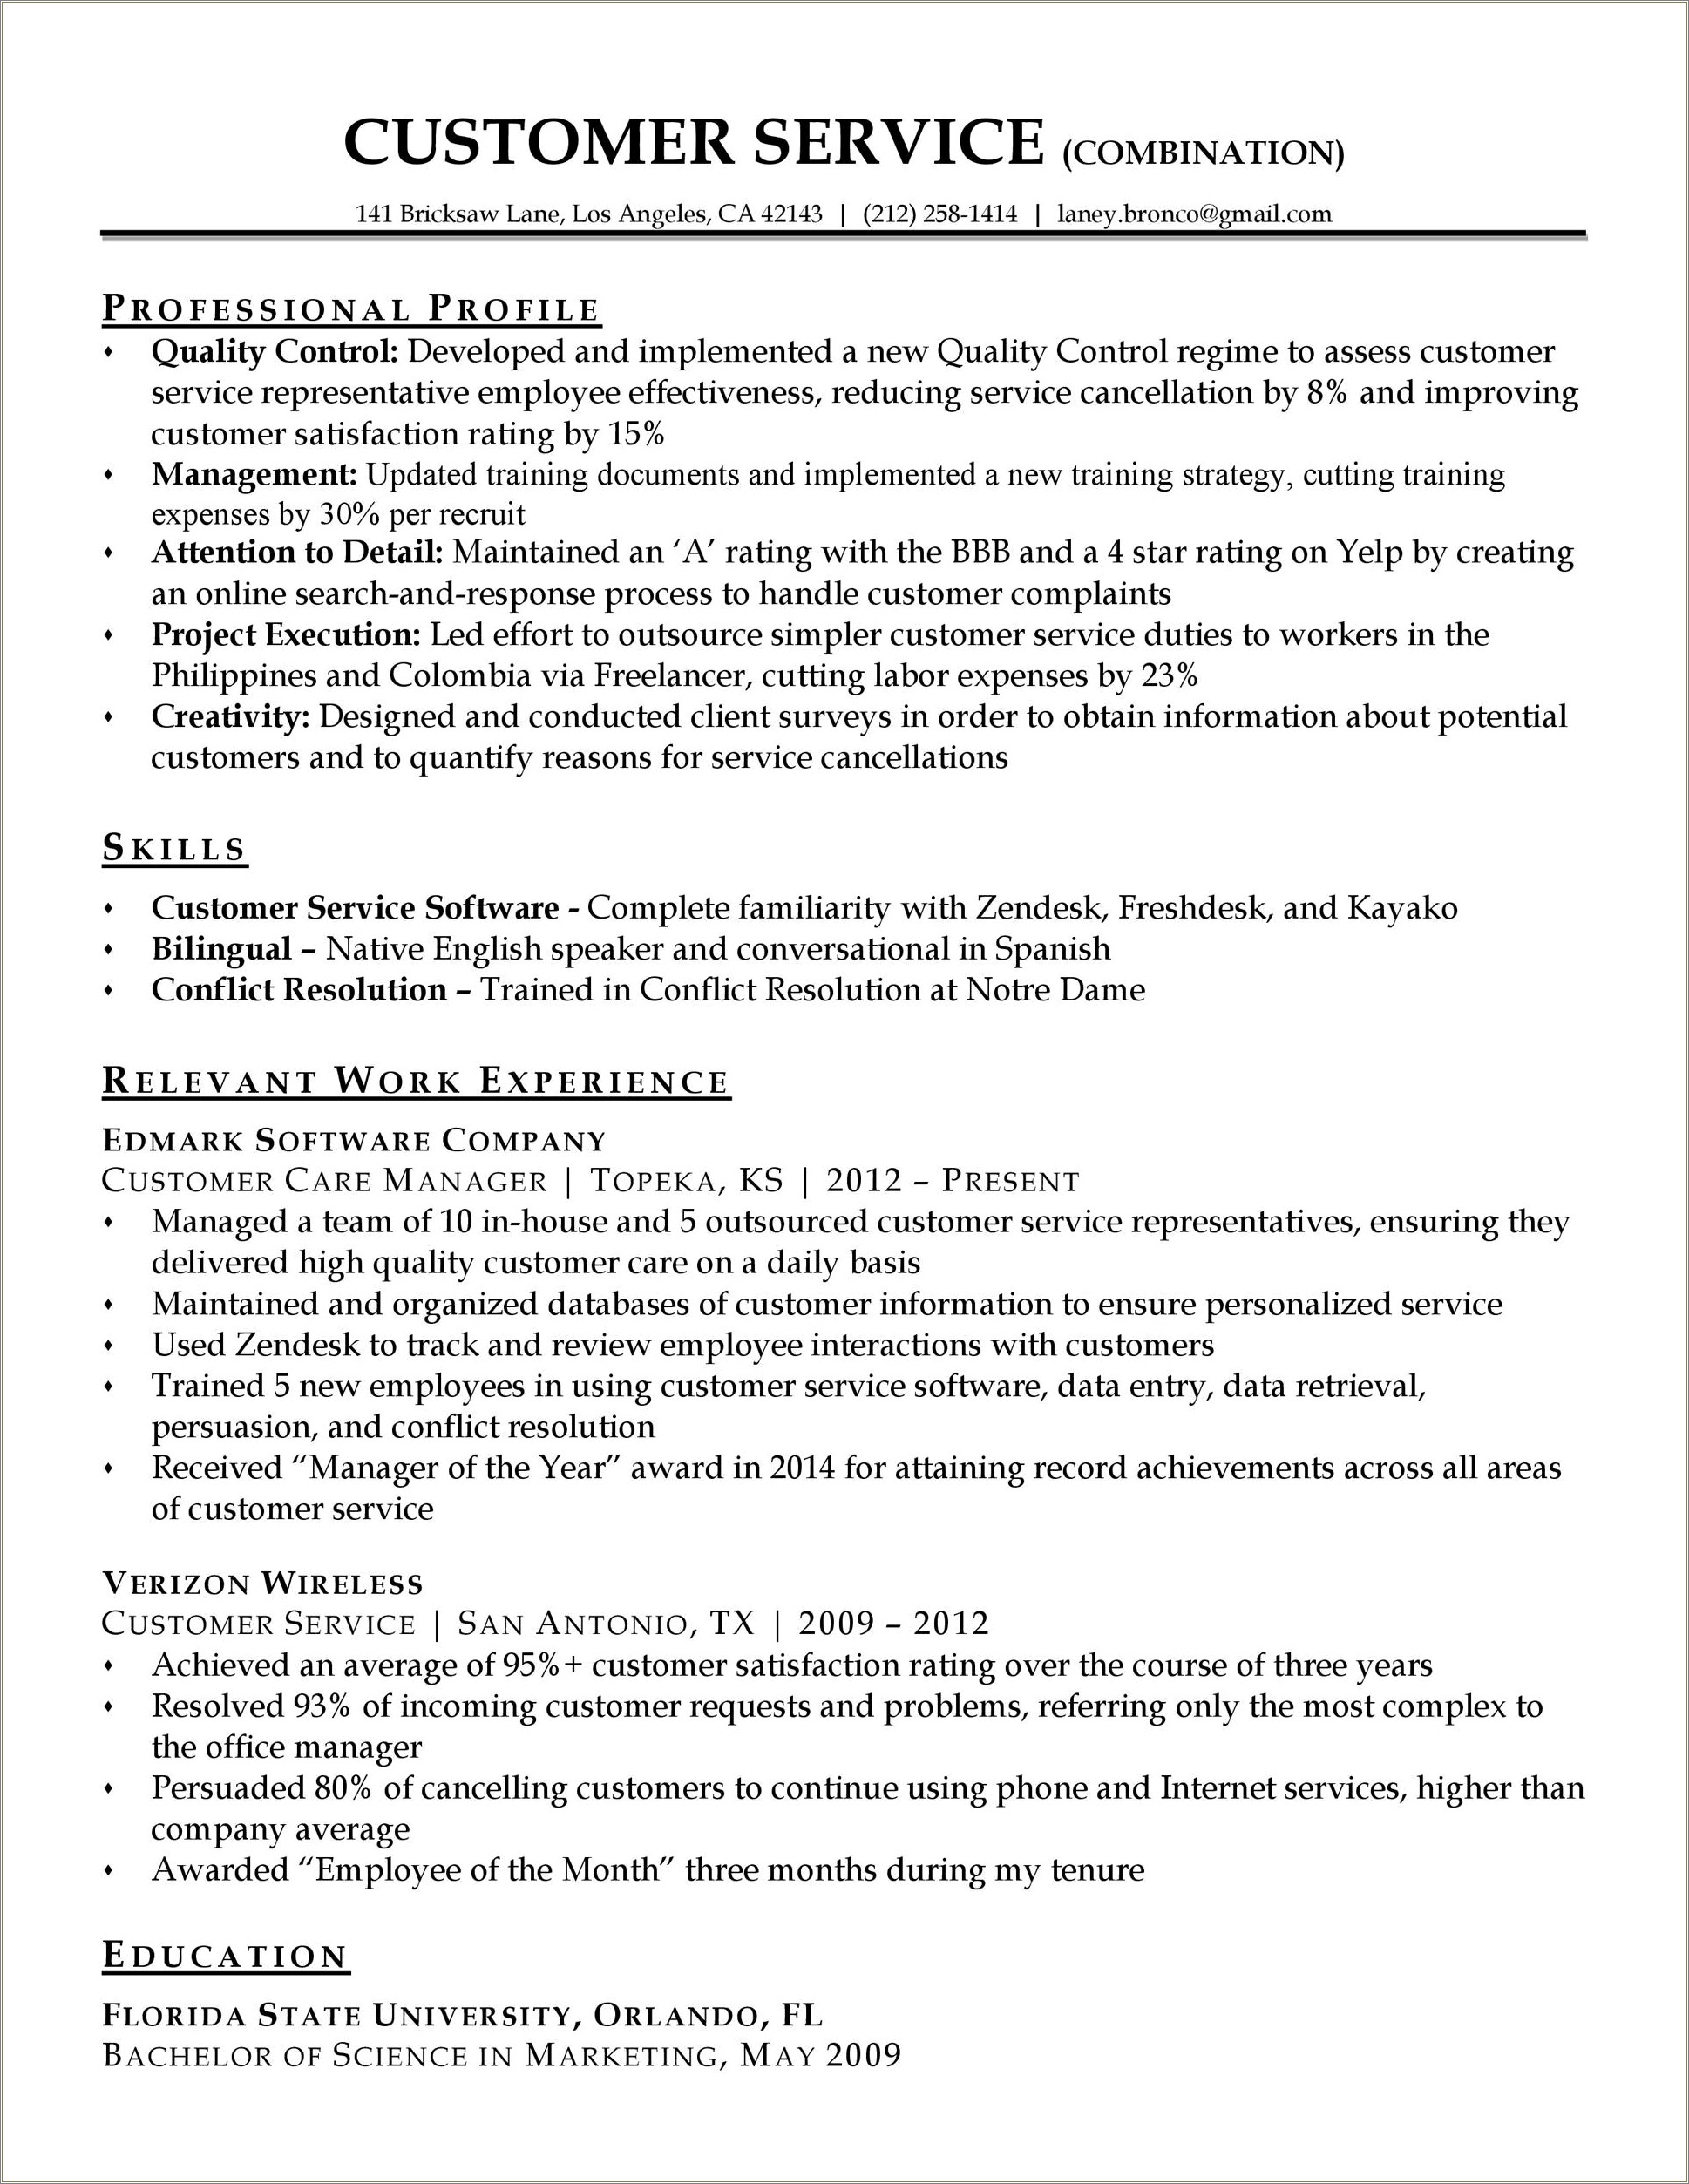 Free Customer Service Manager Resume Templates